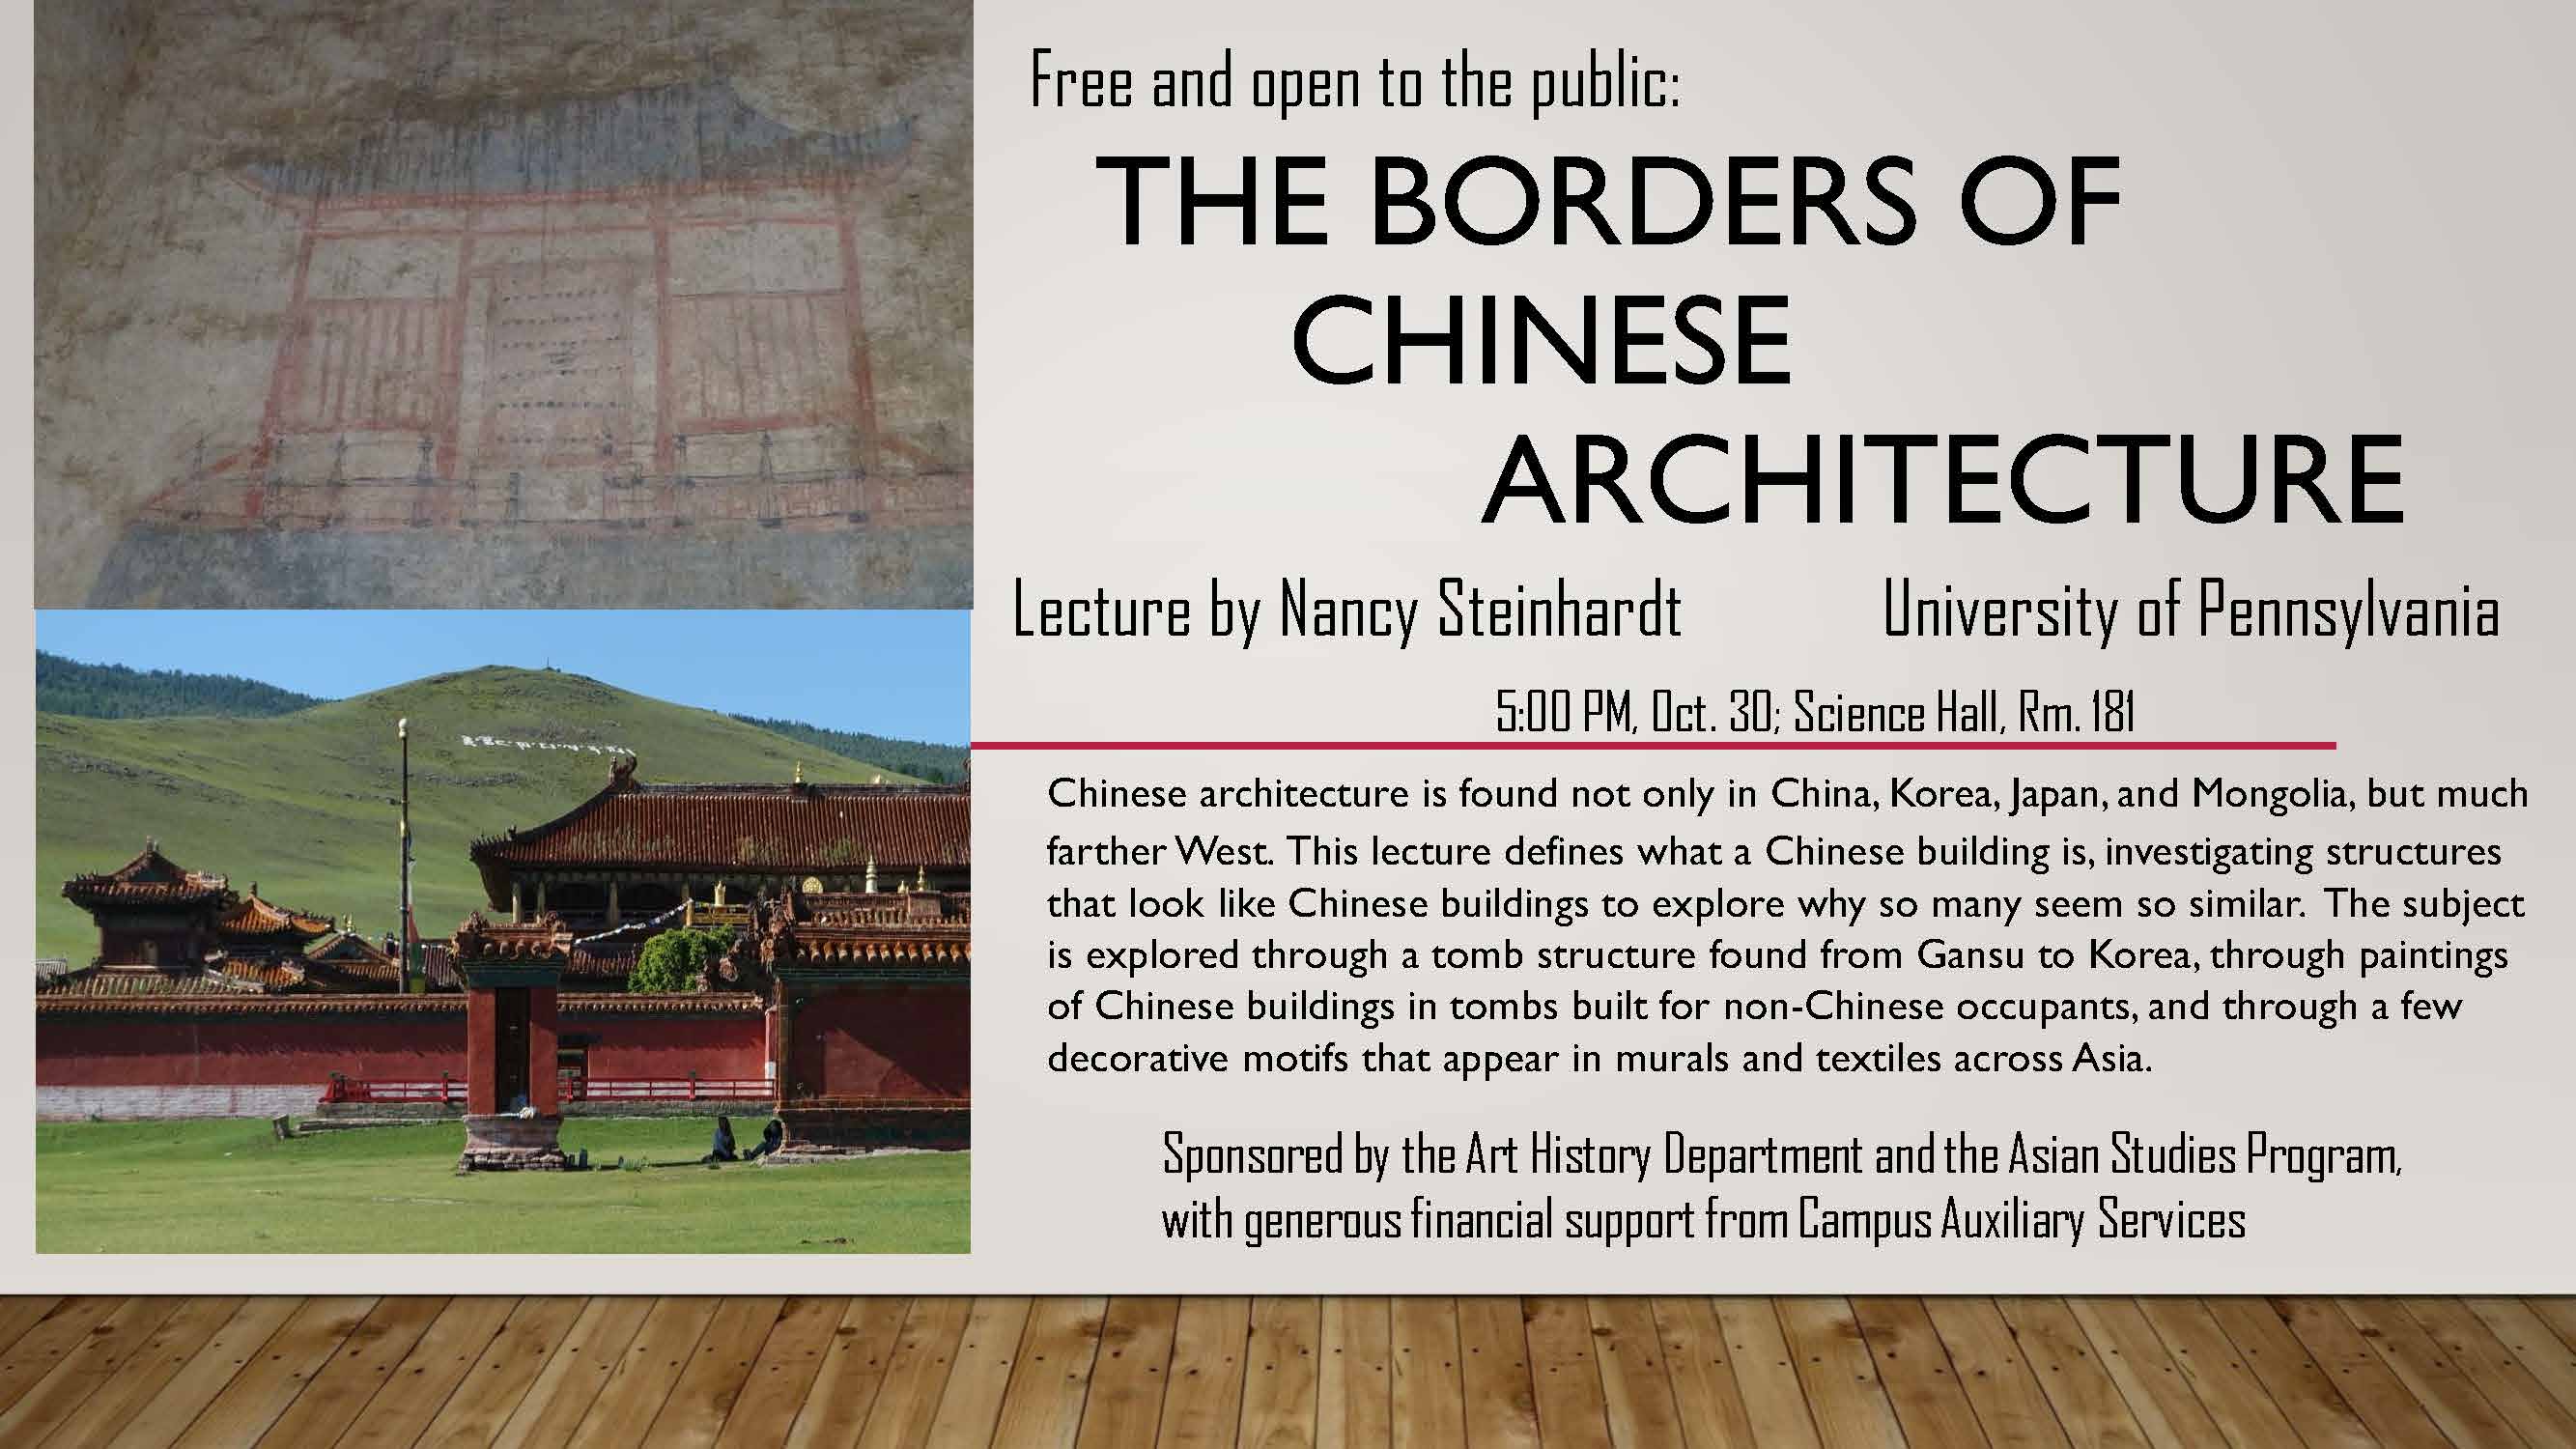 Poster for Prof. Nancy Steinhardt of The University of Pennsylvania's Talk on The Borders of Chinese Architecture